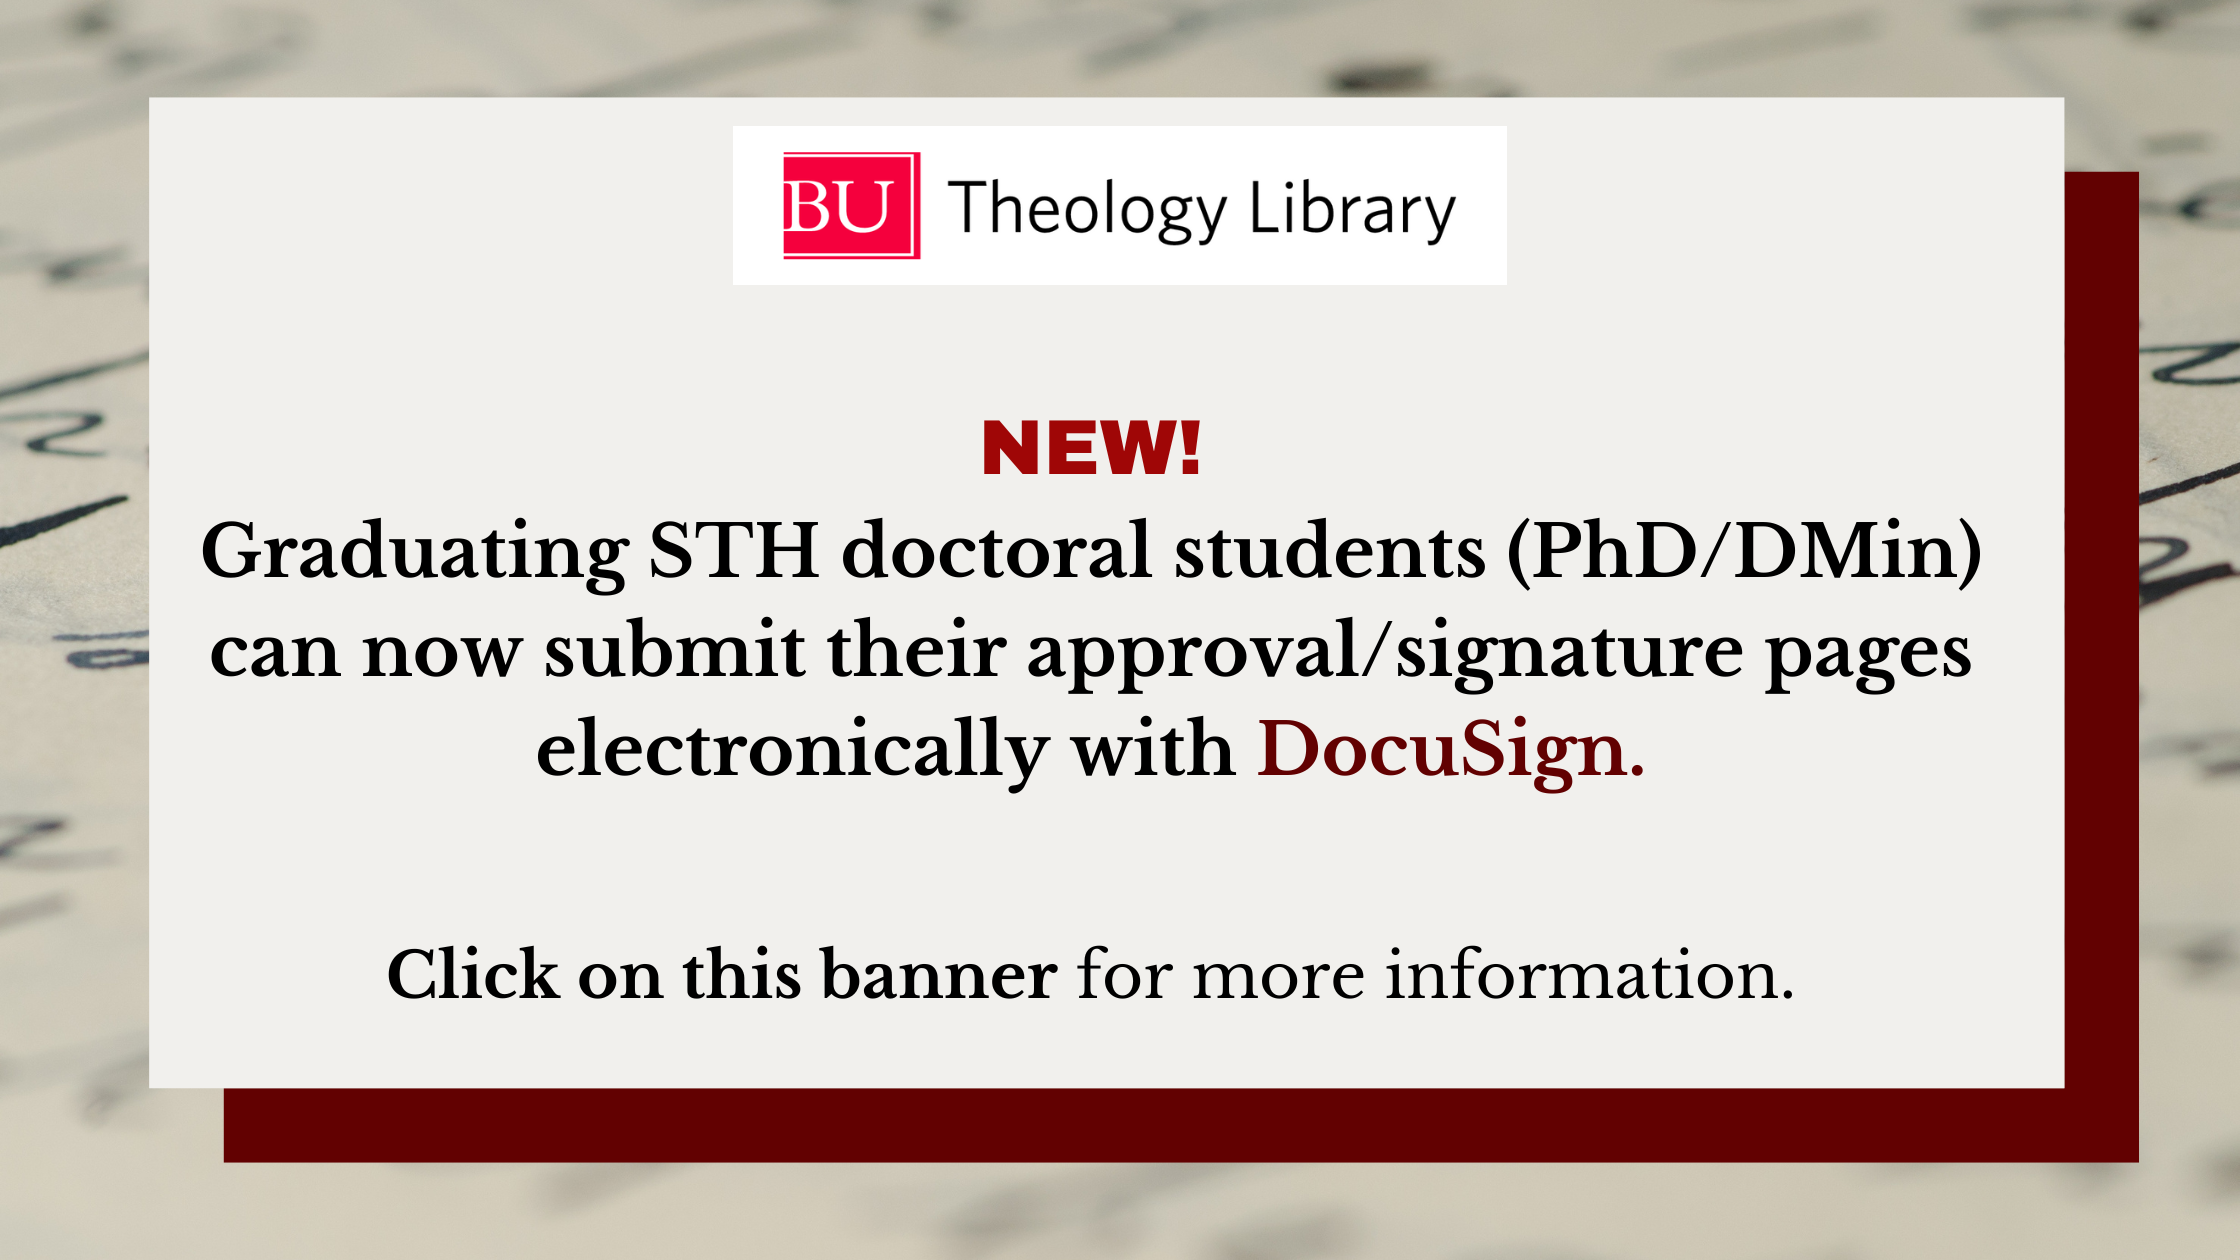 NEW! Graduating STH doctoral students (PhD/DMin) can now submit their approval/signature pages electronically with DocuSign. Click on this banner for more information